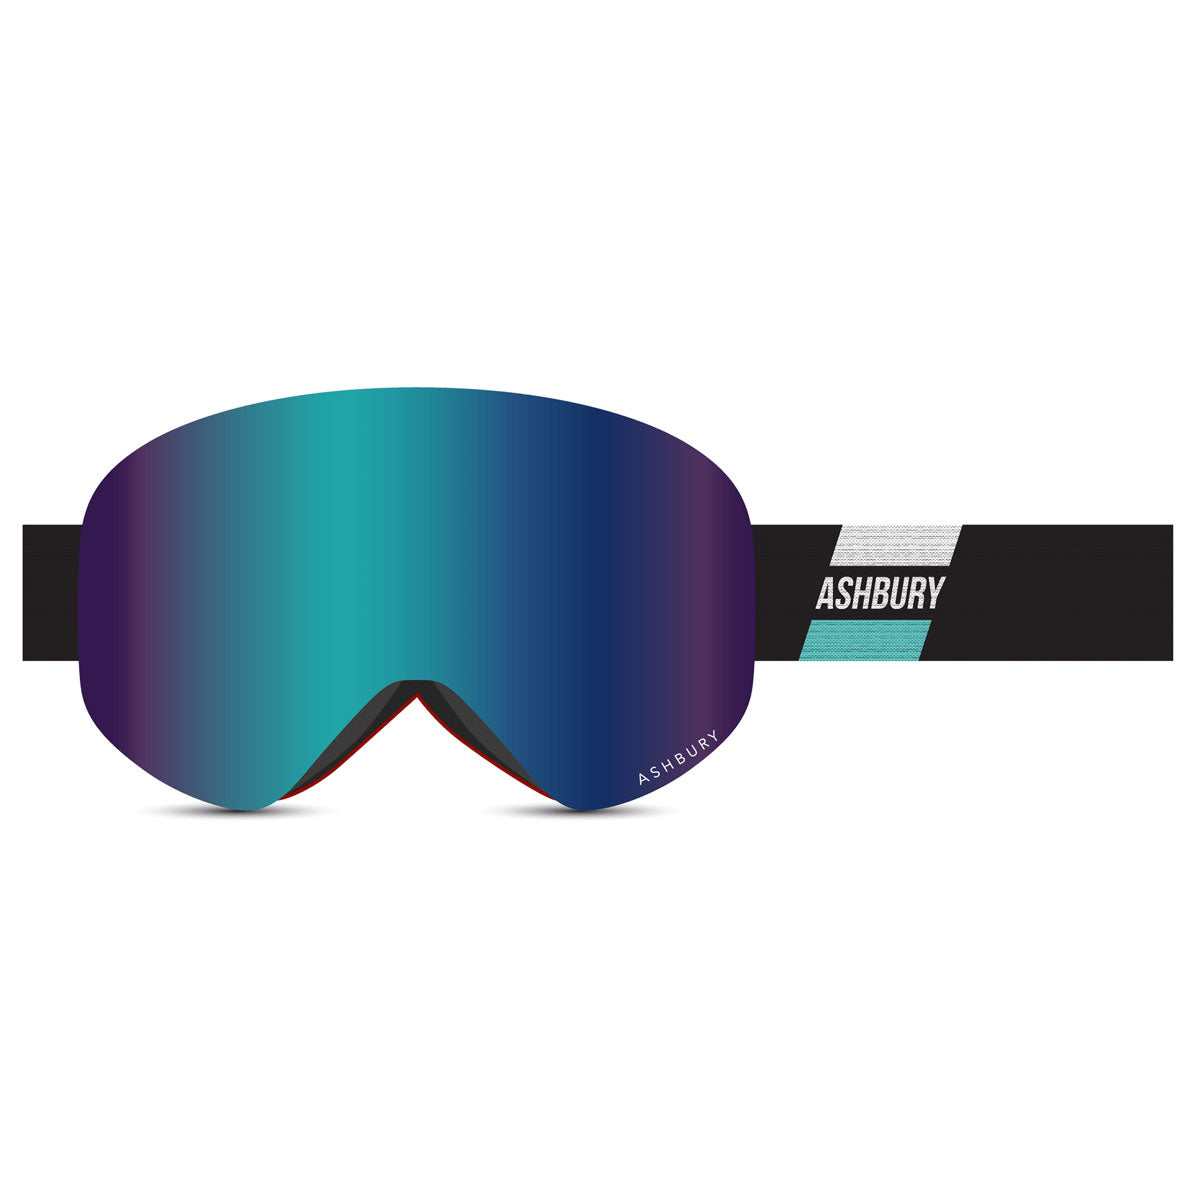 Ashbury Sonic Merlin Snowboard Goggles - Teal Mirror/Yellow Spare image 1